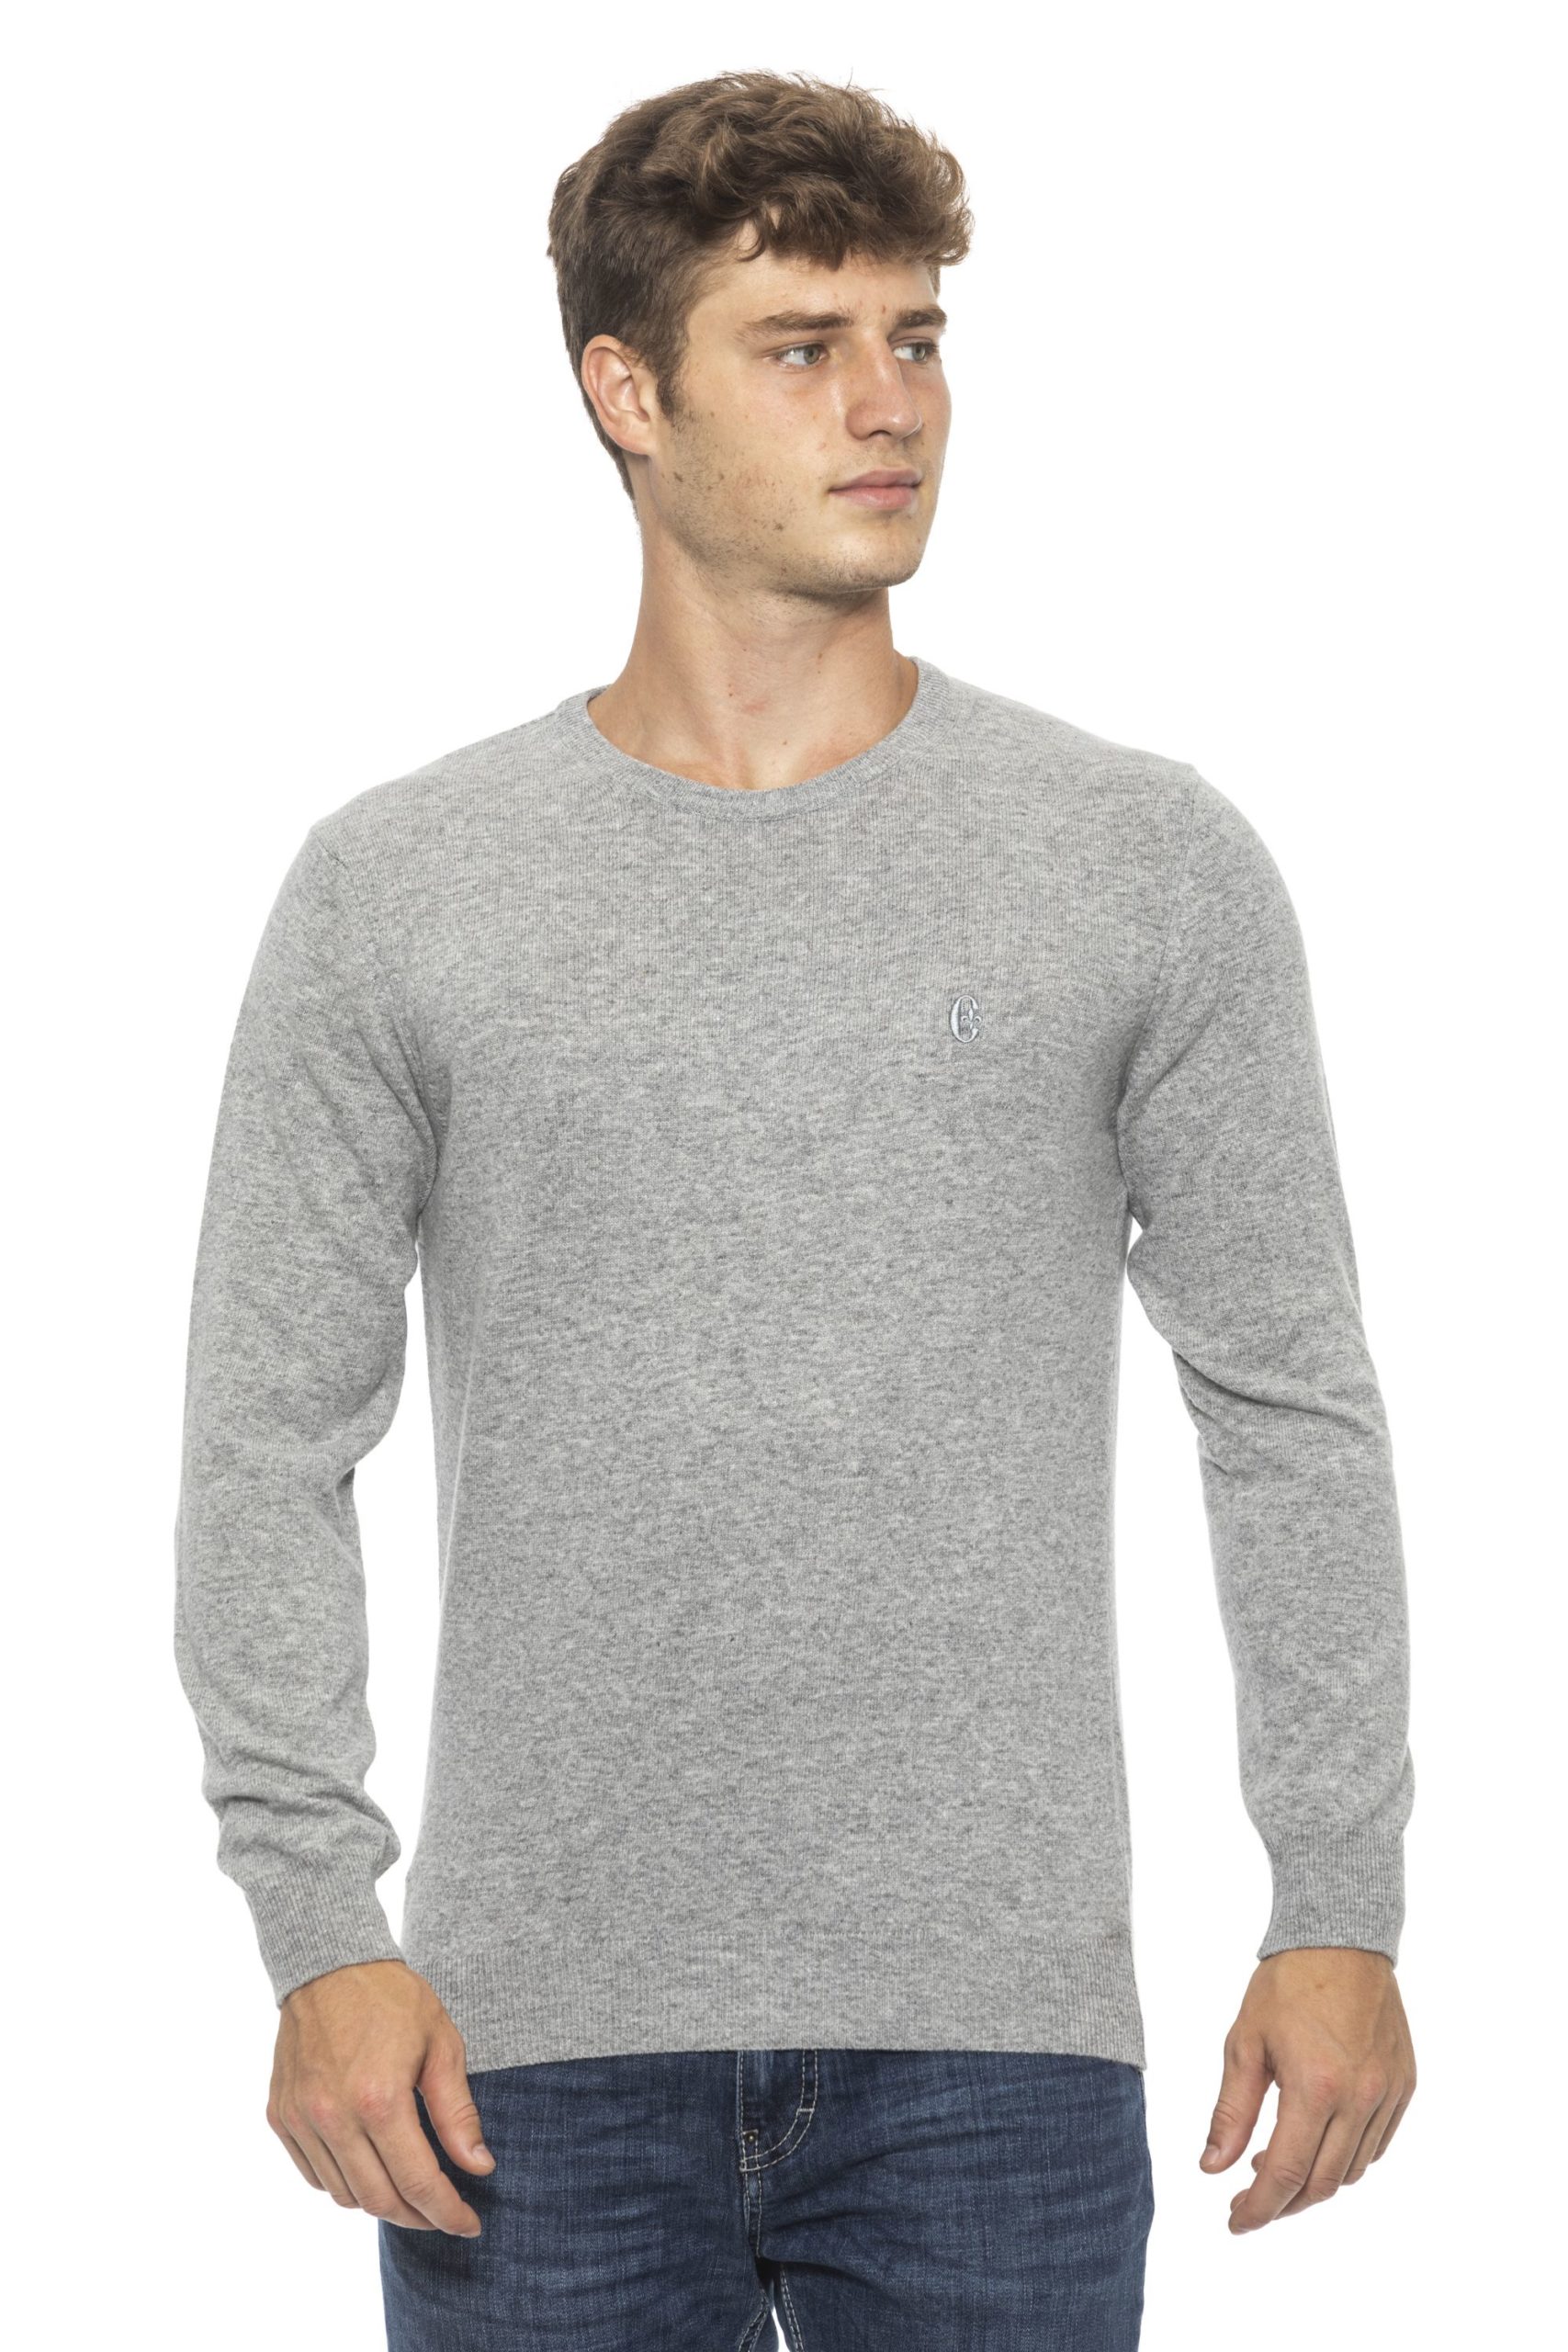 Conte of Florence Men's Sweater Silver CO1272733 - M